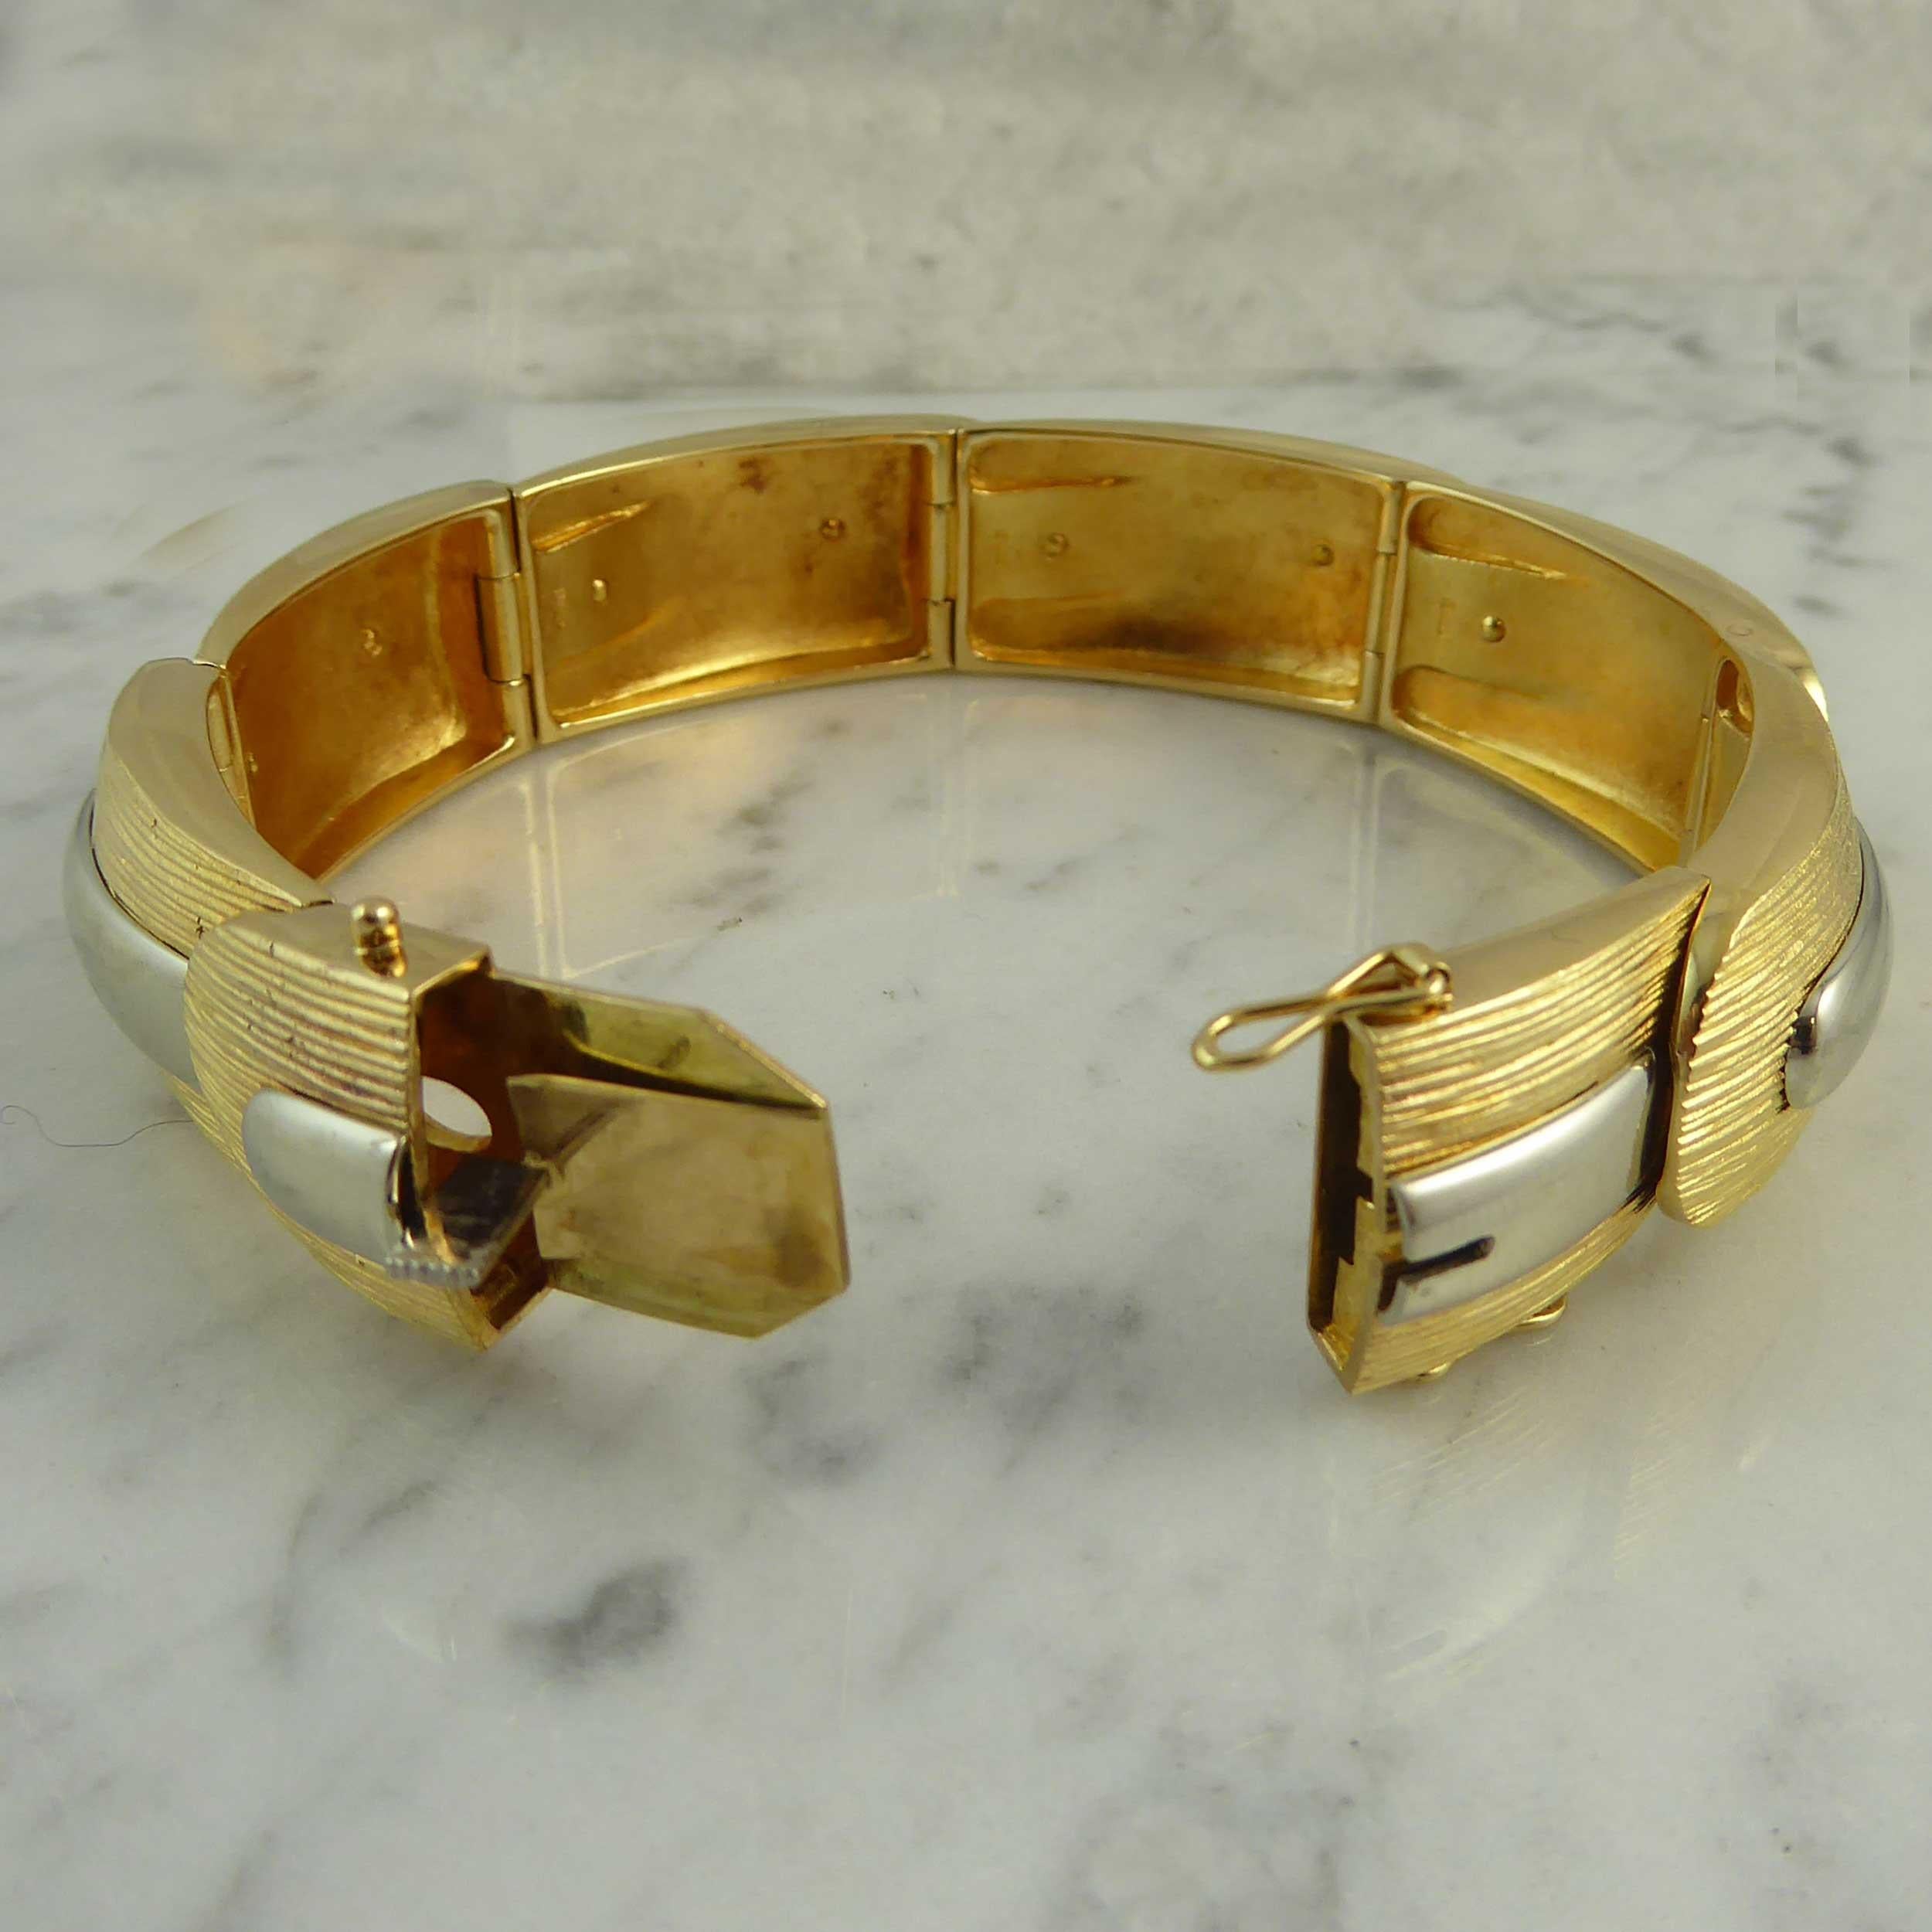 Vintage Designer Bracelet 1974, Lapponia Finland, Yellow and White Gold, Nordic For Sale 2